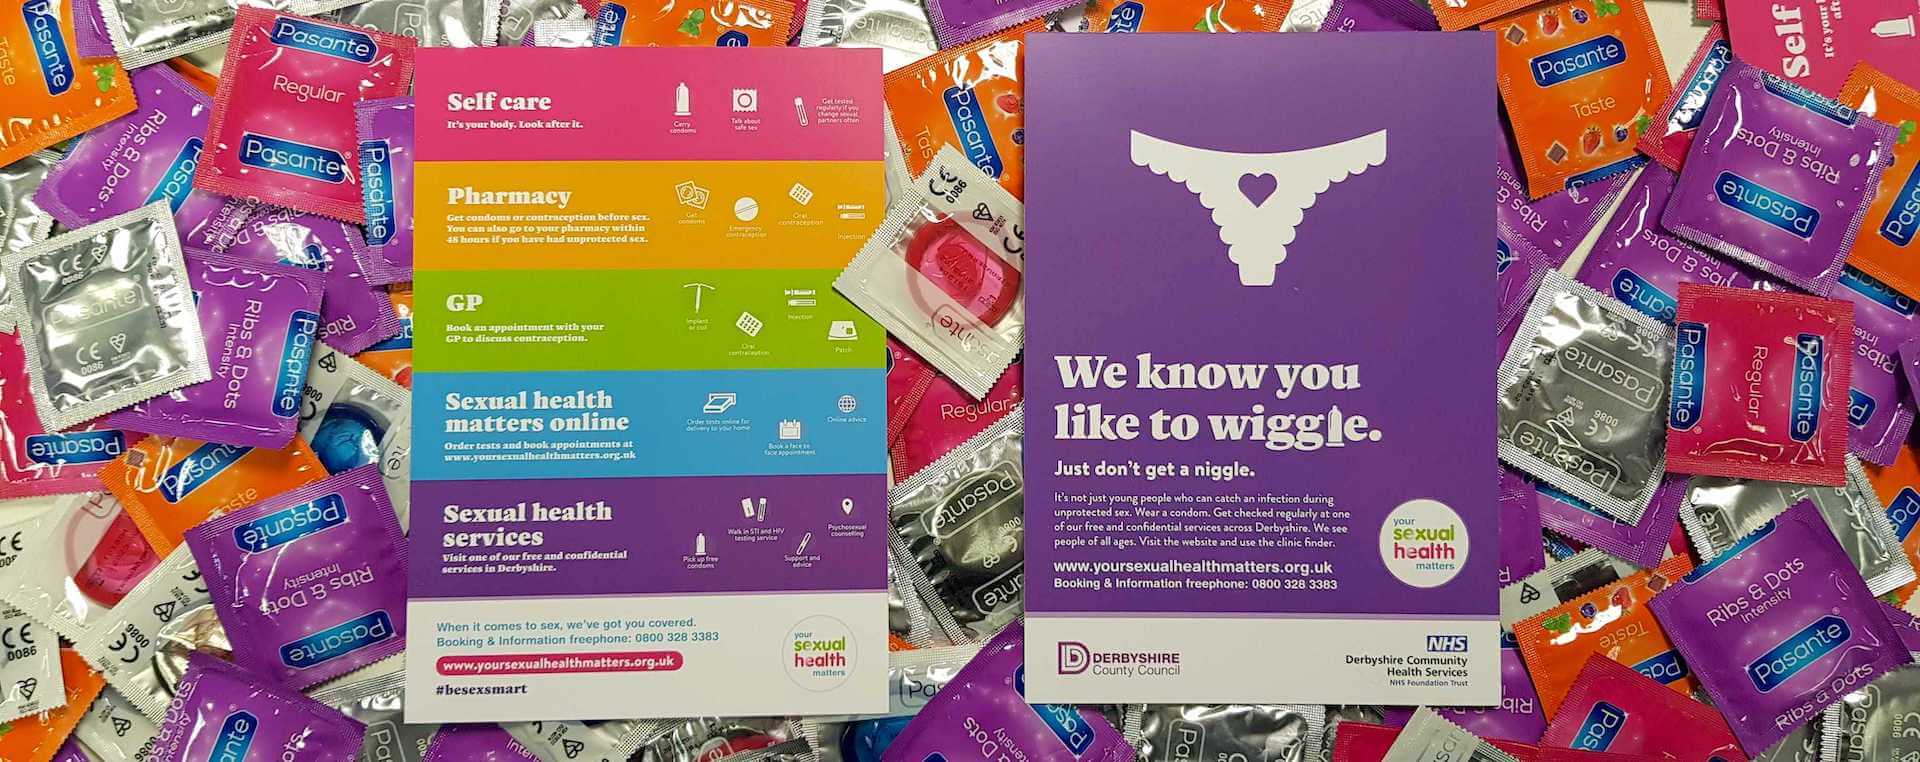 Brightly coloured flyers from the 'Your Sexual Health Matters campaign' on a pile of condoms.